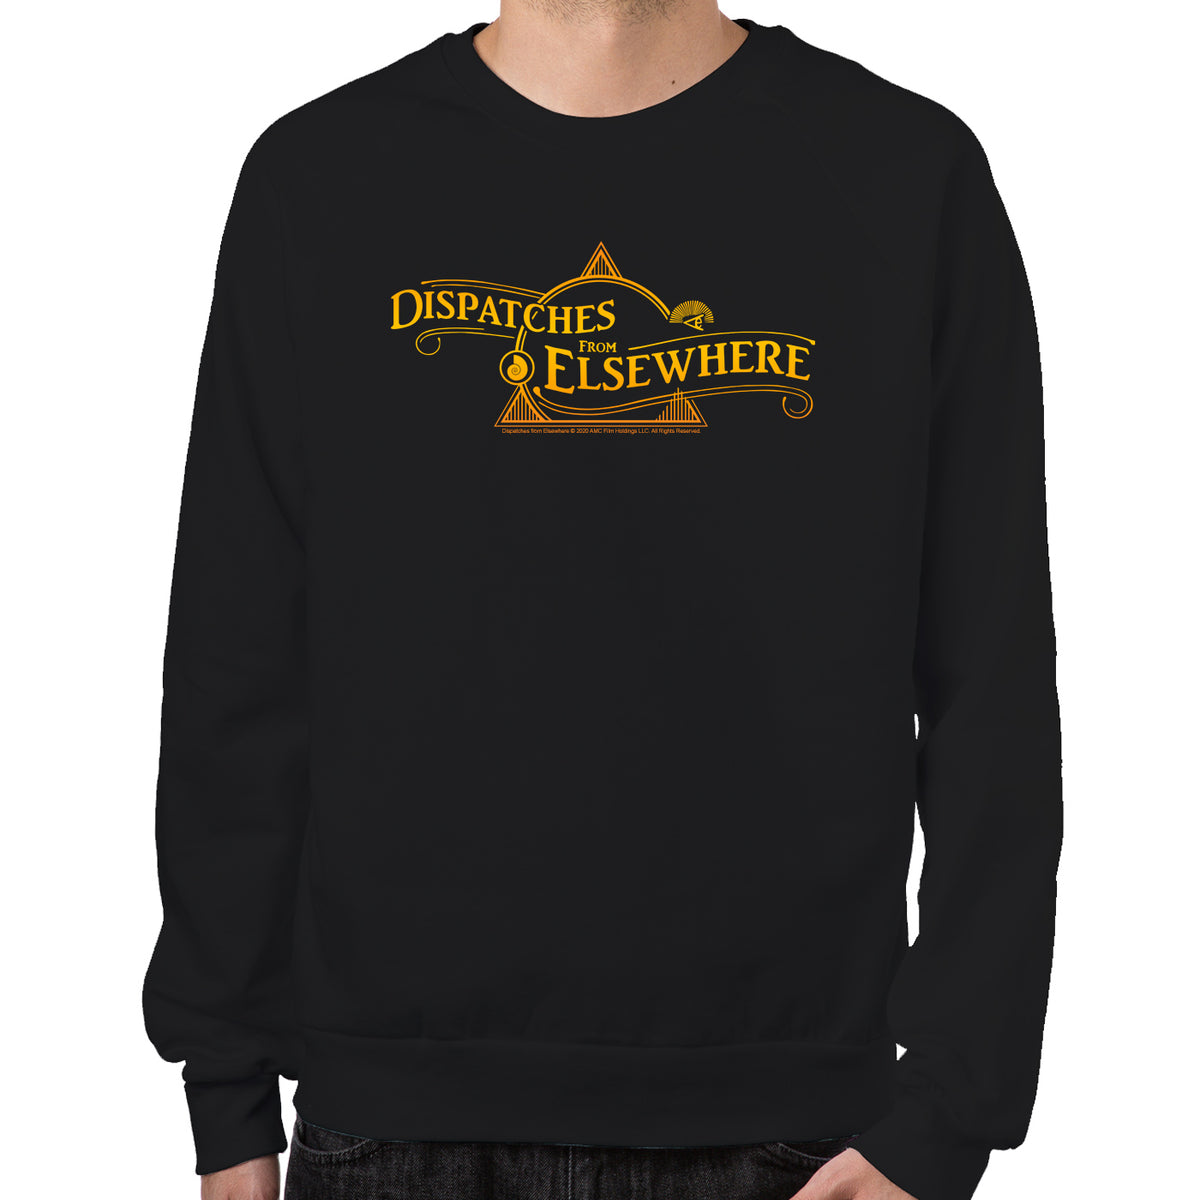 Dispatches From Elsewhere Sweatshirt